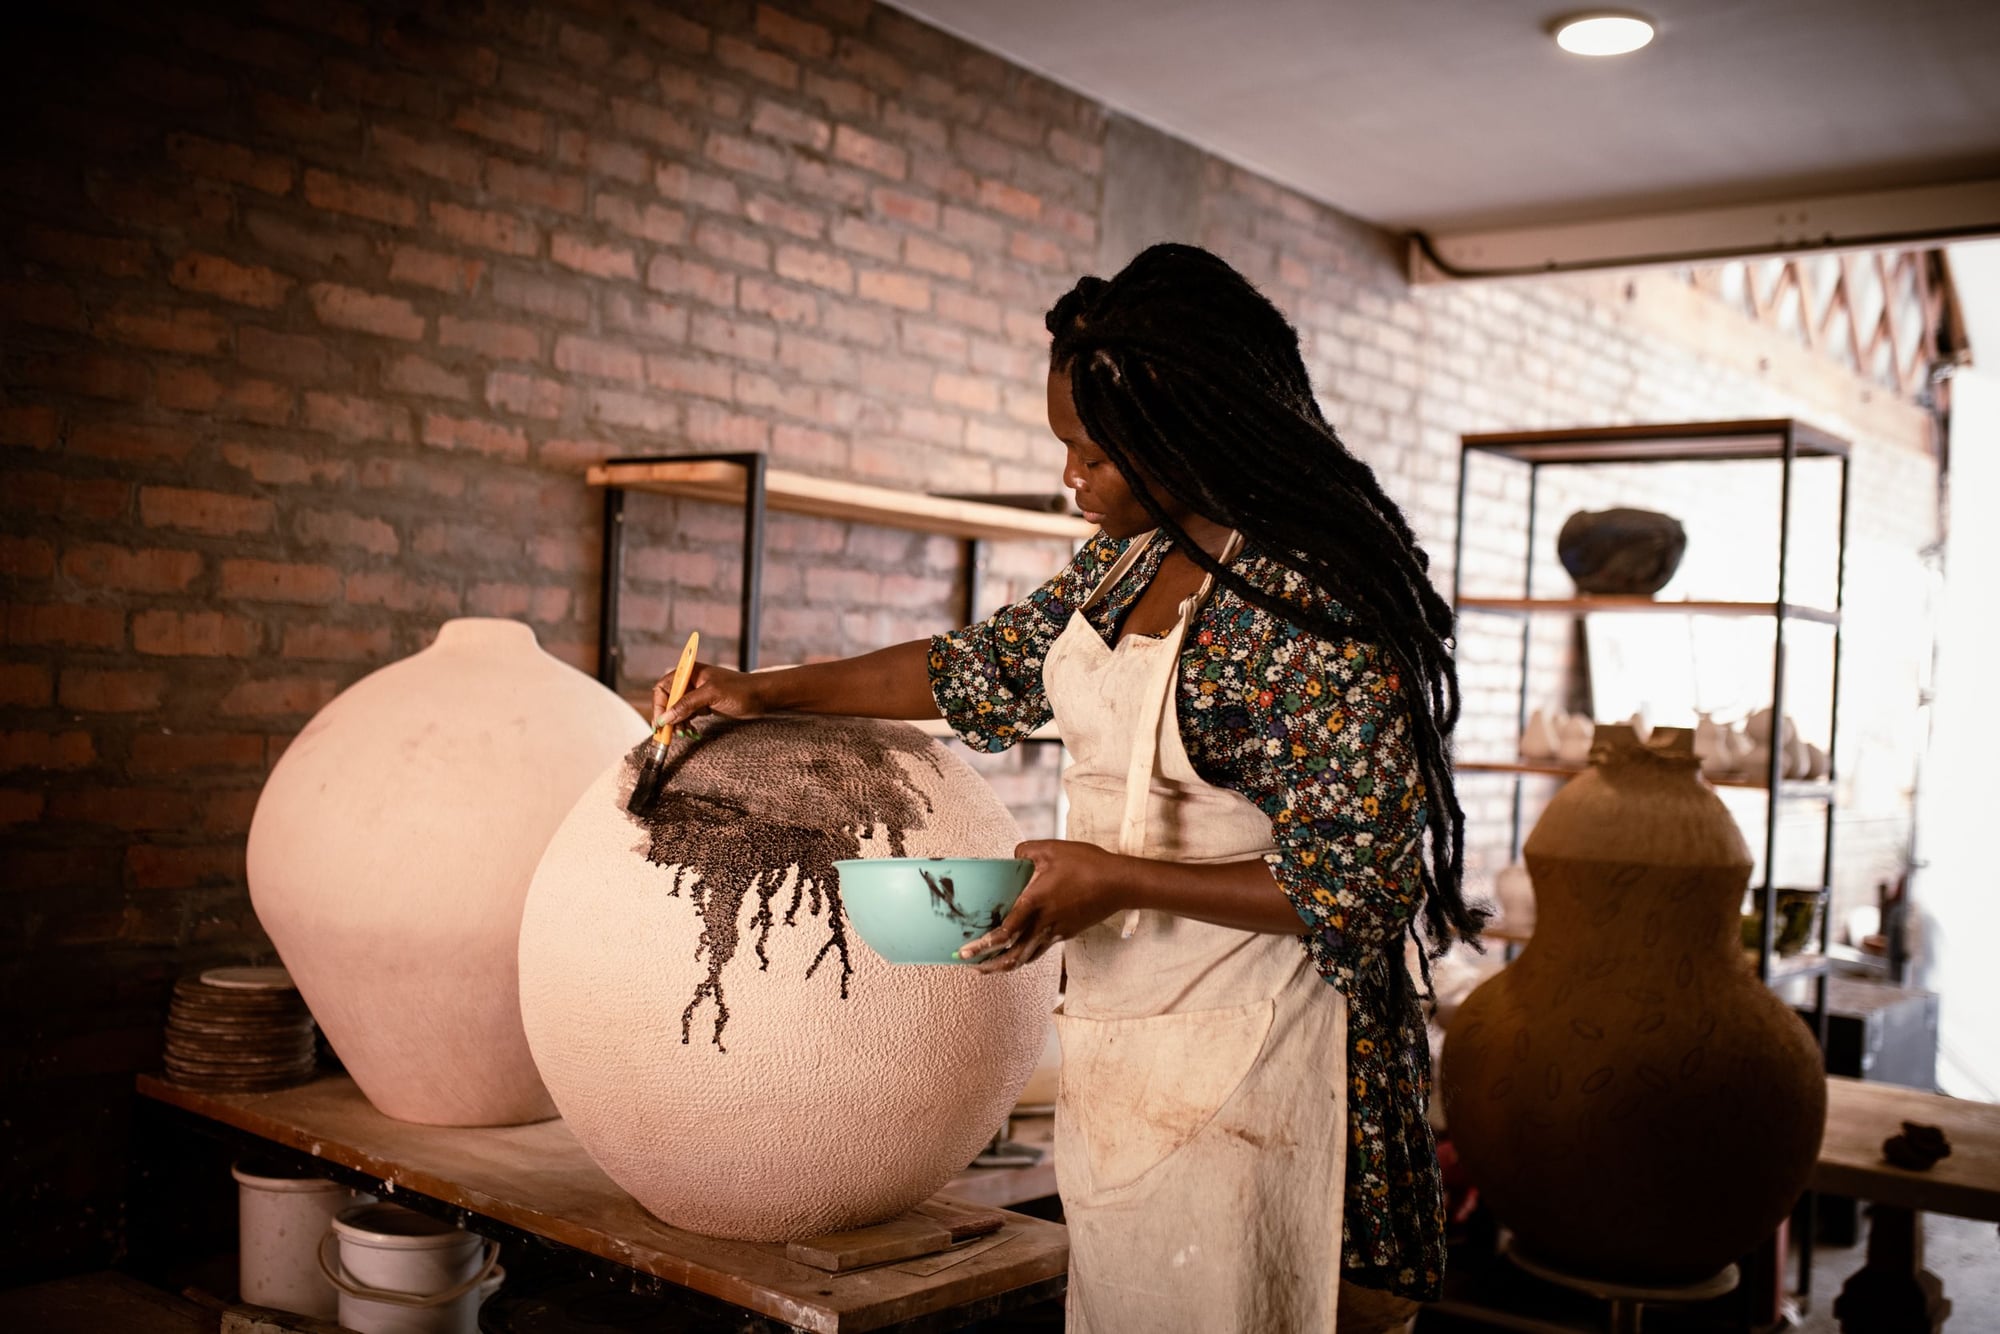 South African artist Zizipho Poswa hard at work on one of her clay 